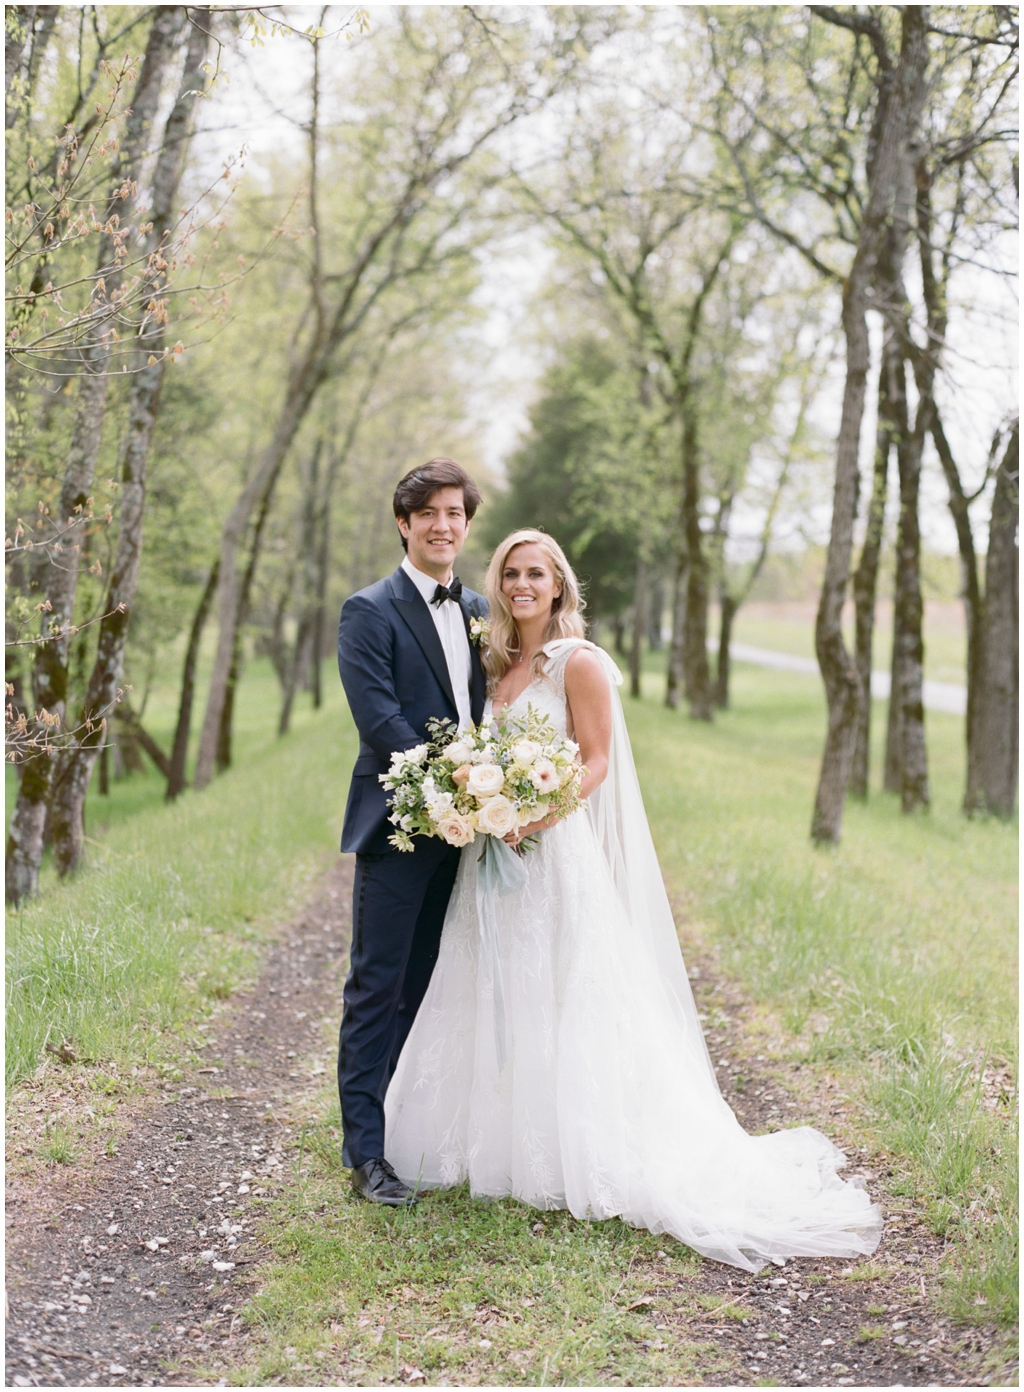 Soft beautiful bride and groom portraits at Marblegate Farm